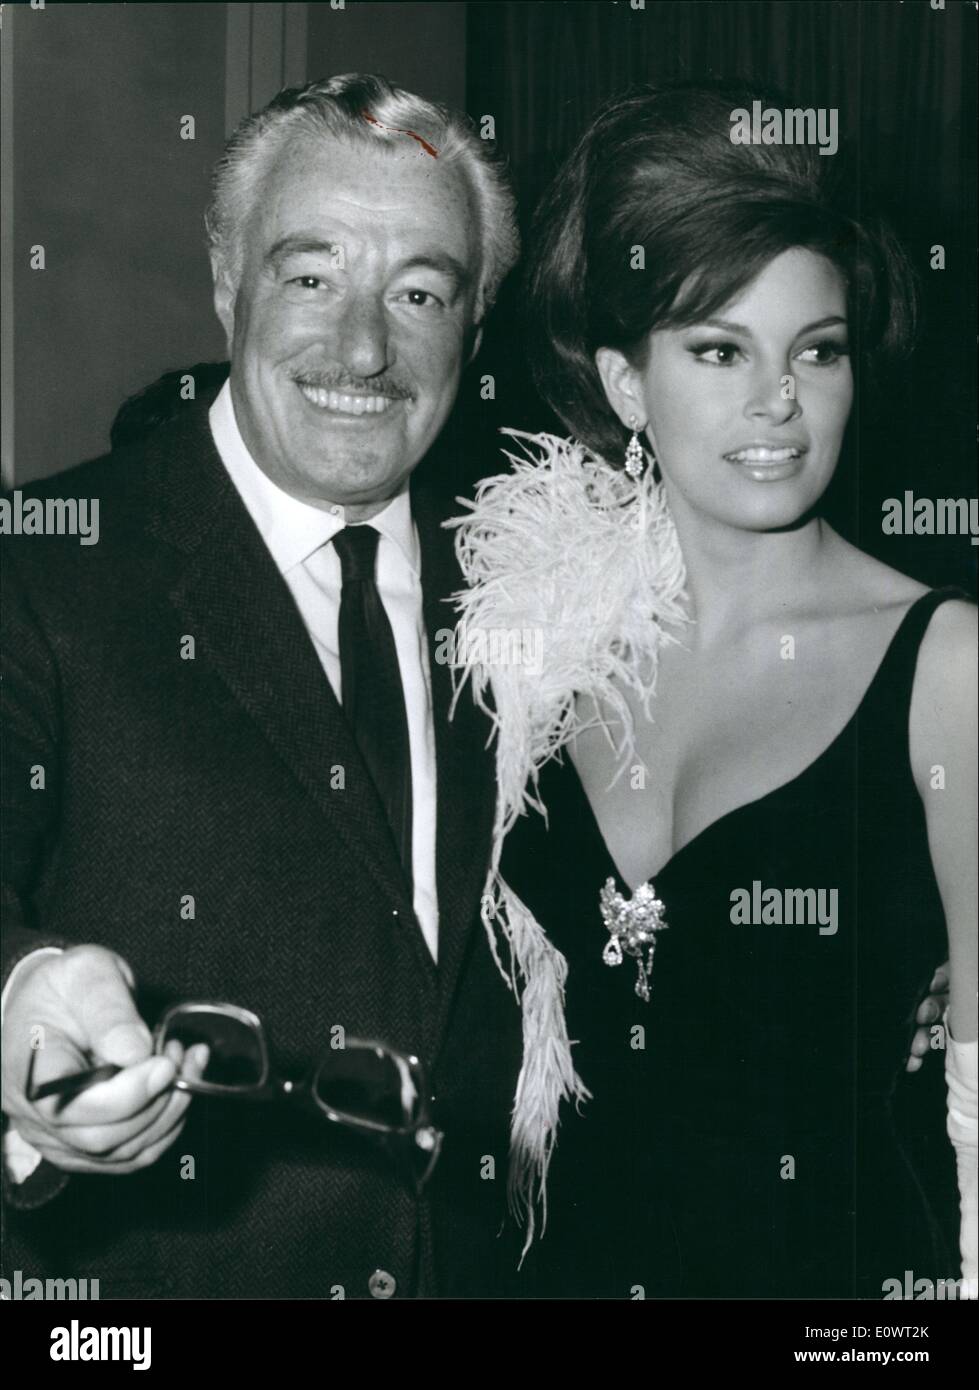 Apr. 04, 1964 - Rome: The stars of the film ''The biggest bundle of them all'' were presented to the press. They are Vittorio De Sica (an old gangster), Edward G. Robinson (the professors of the ganga..), and the last superstar Raquel Welch (the woman of the gang ...) Photo shows Vittorio De Sica and Raquel Welch. Stock Photo